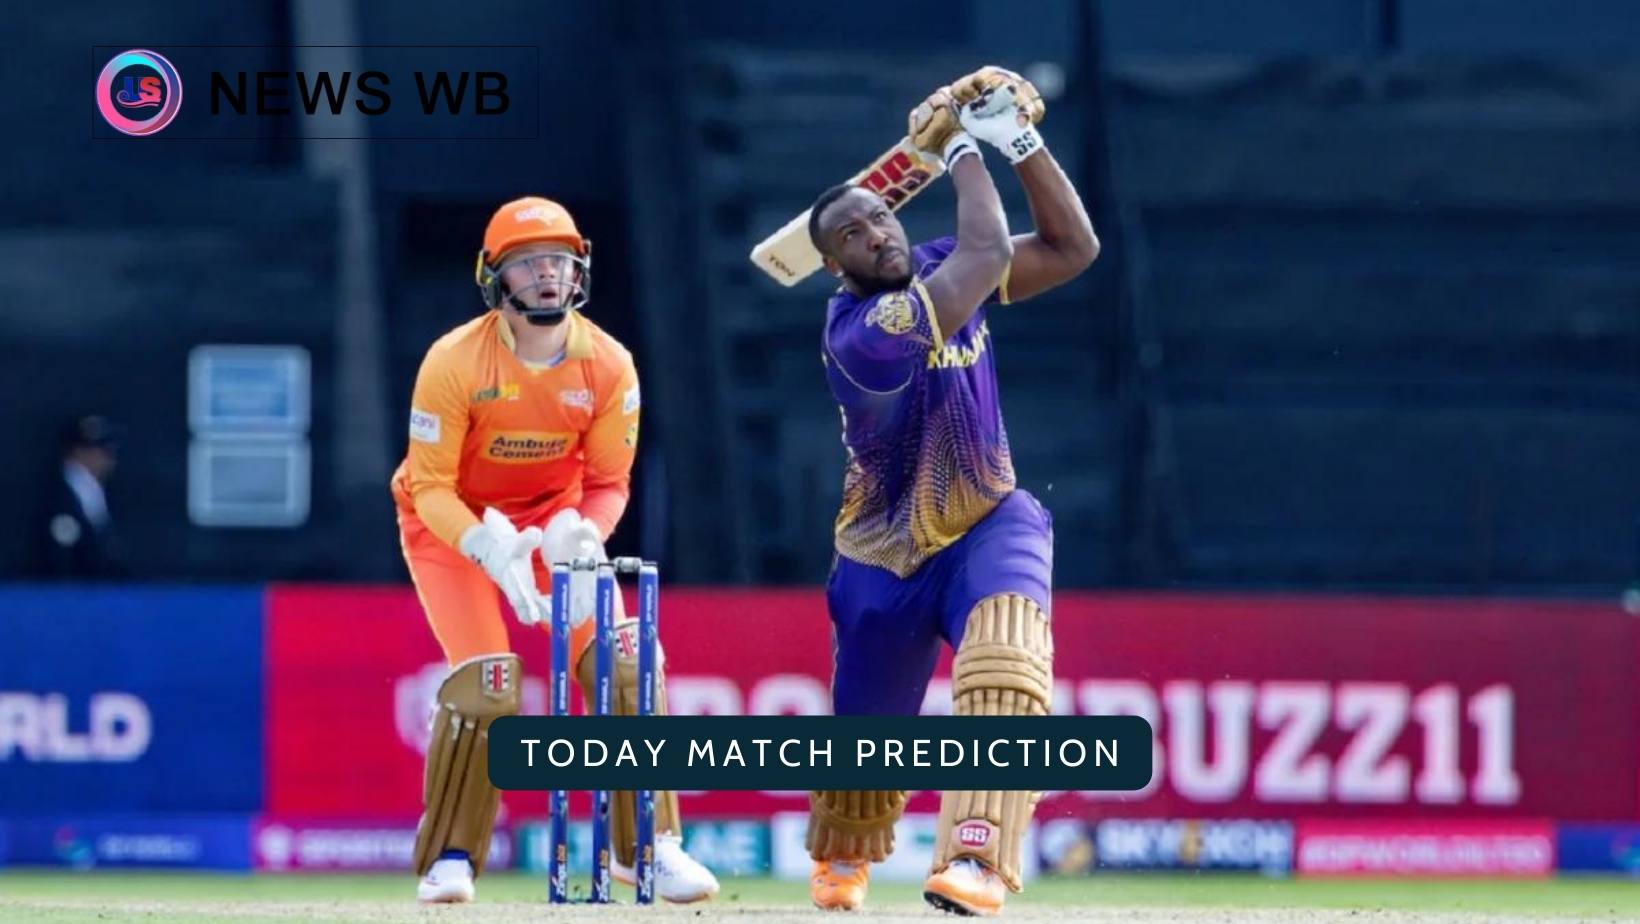 Today Match Prediction: ADKR vs GG Dream11 Team, Abu Dhabi Knight Riders vs Gulf Giants 16th Match, Who Will Win?